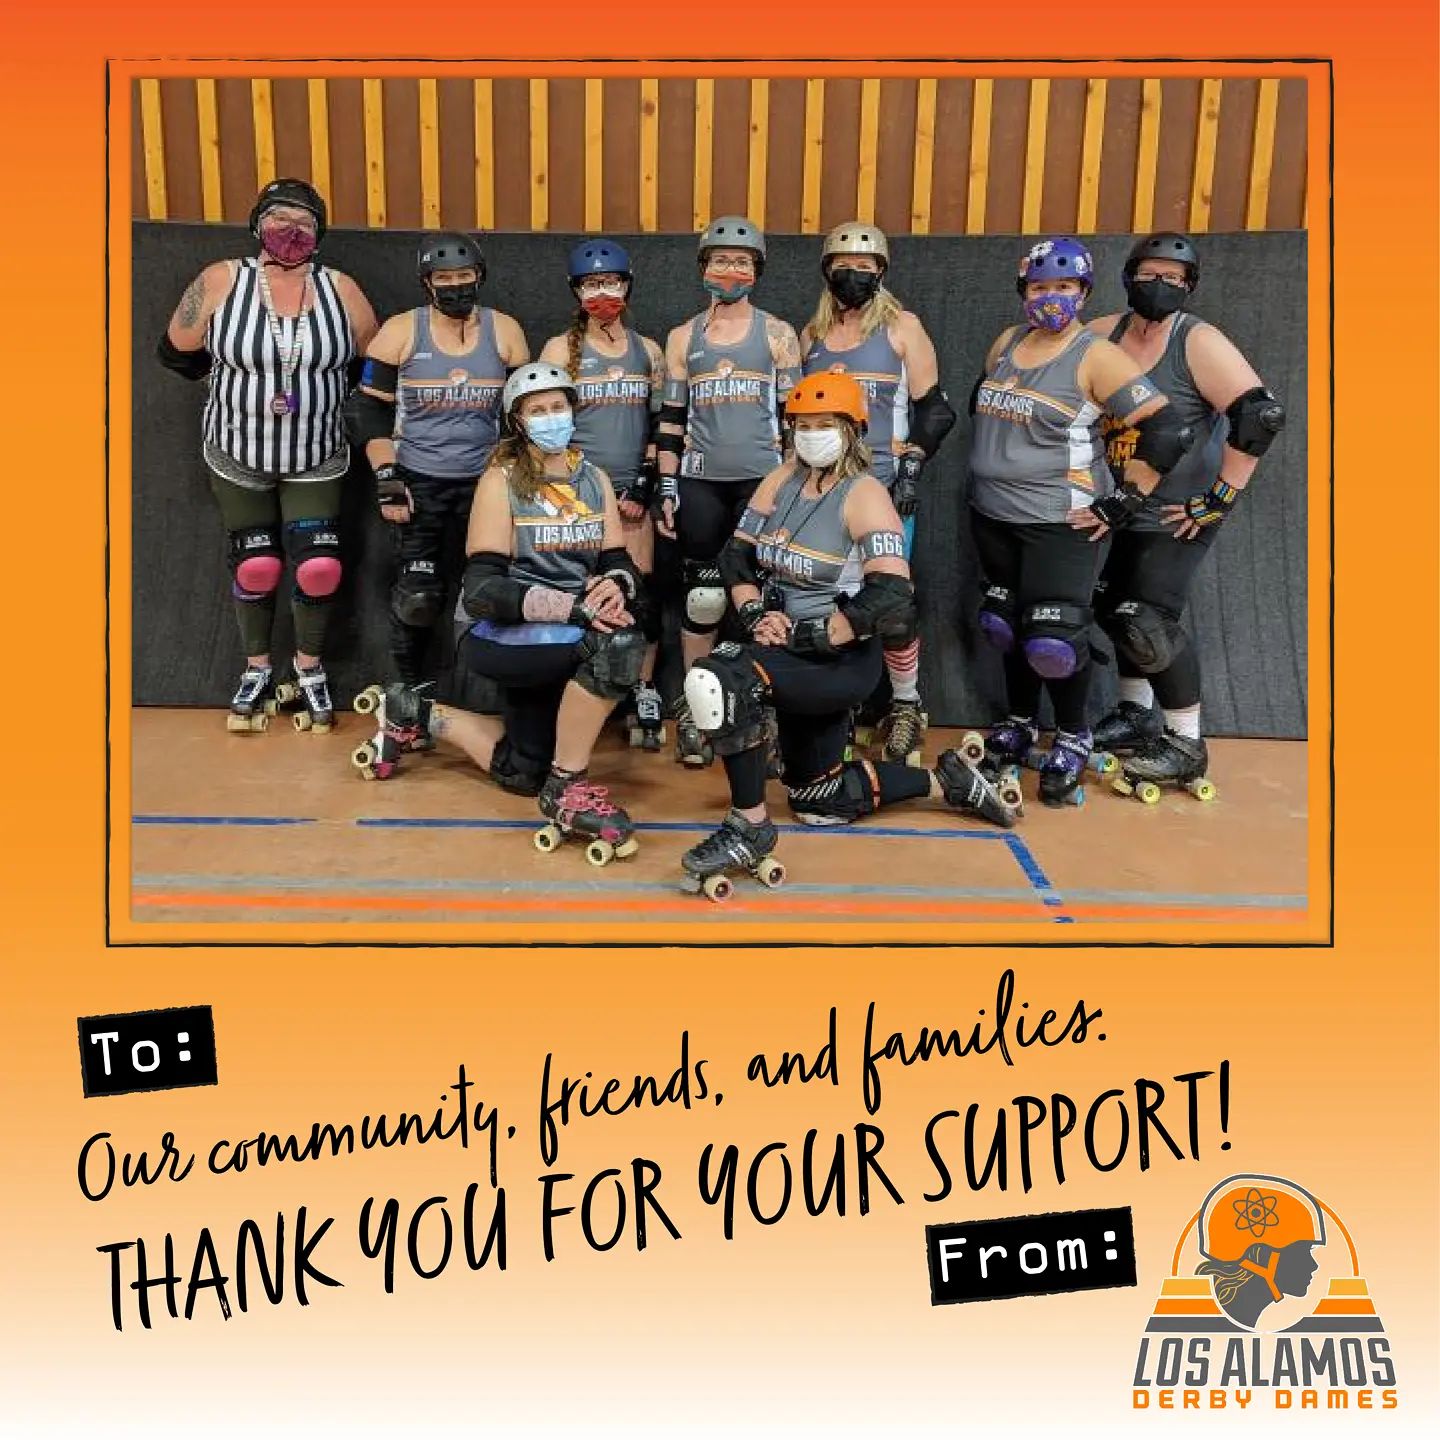 To our community, friends, and families: We thank you for your support. Our GoFundMe fundraiser to purchase safety mats was a success! With your generosity, we were able to purchase mats for our indoor practice venue so that we may continue to play the sport that we love safely. We love our fans! Love, LADD.

#fanappreciation #followerappreciation #gofundme #rollerderby #losalamosderbydames #losalamos #newmexico #tacosauce